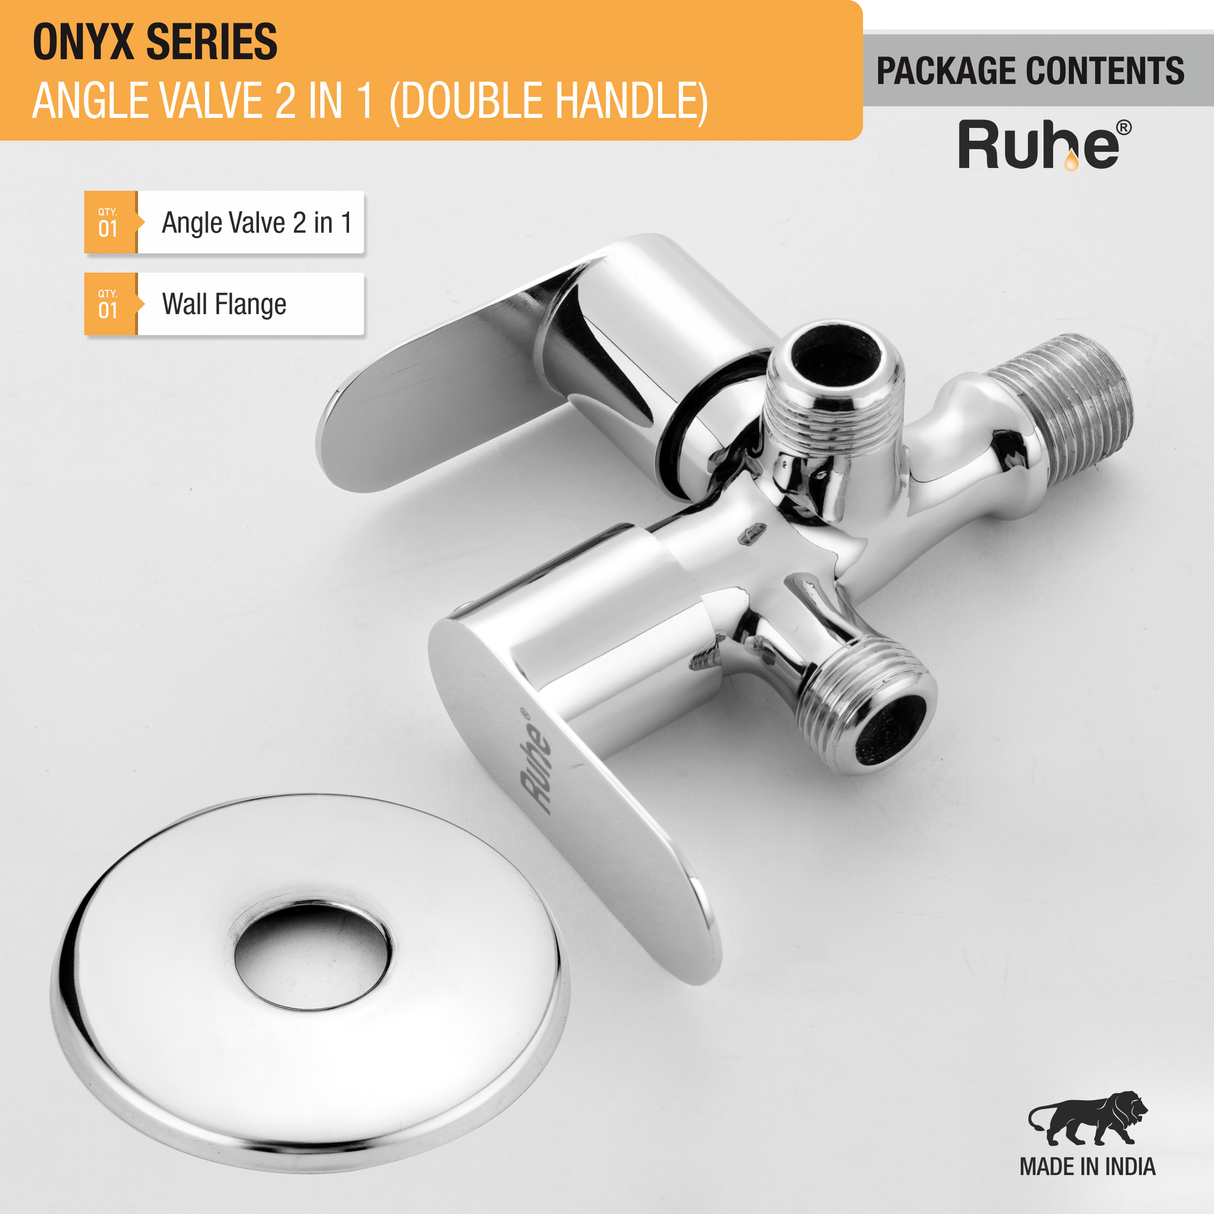 Onyx Two Way Angle Valve Brass Faucet (Double Handle) package content